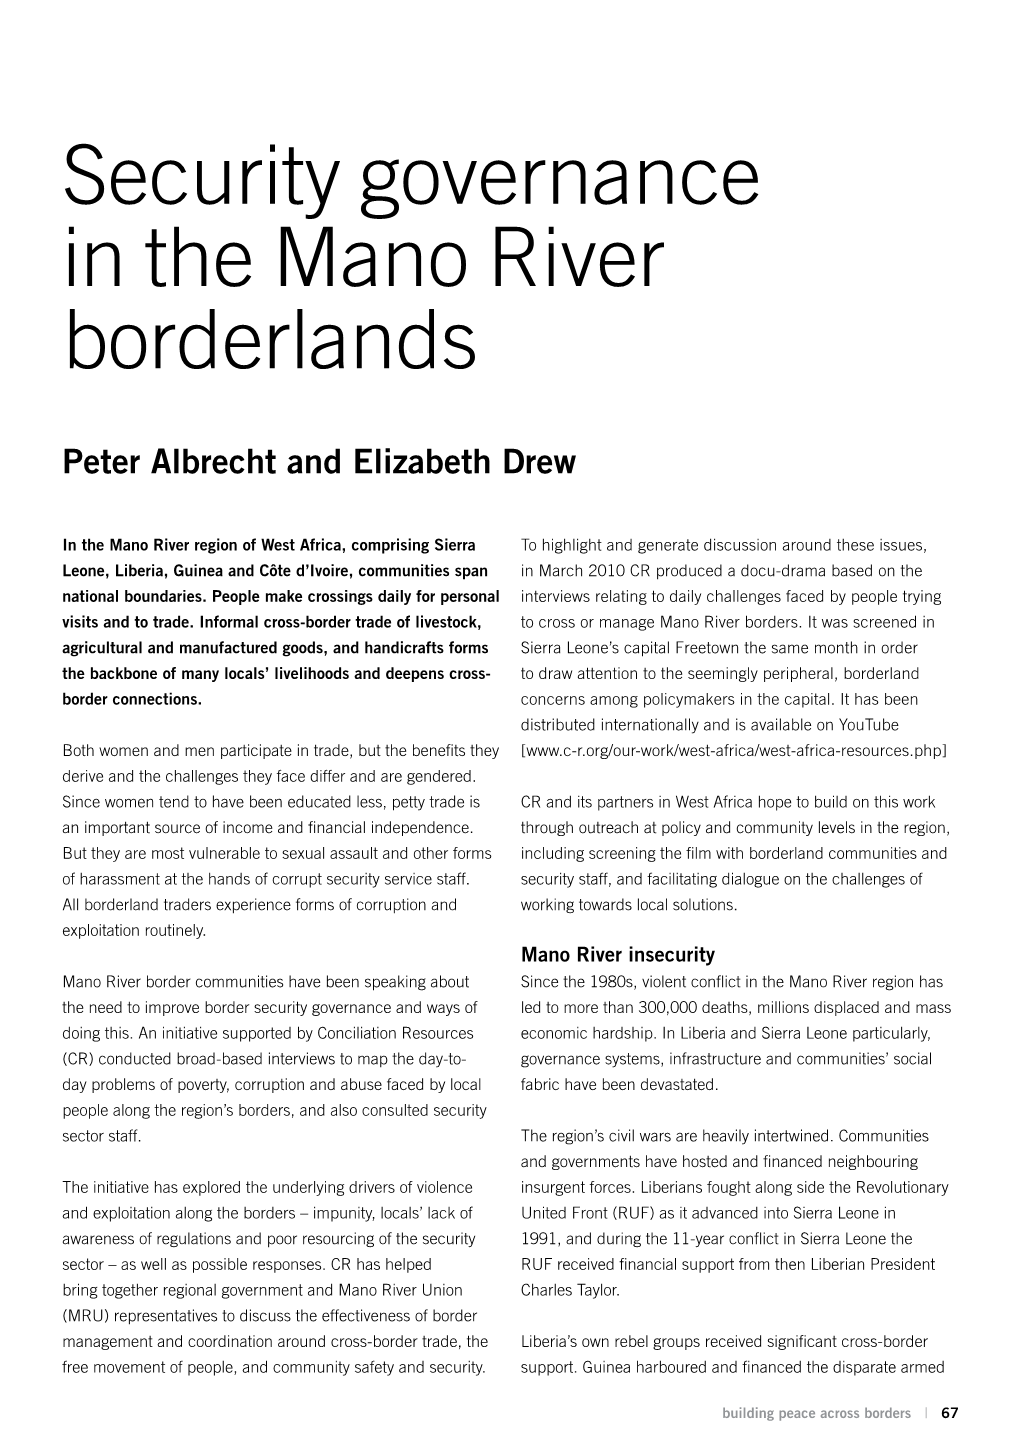 Security Governance in the Mano River Borderlands